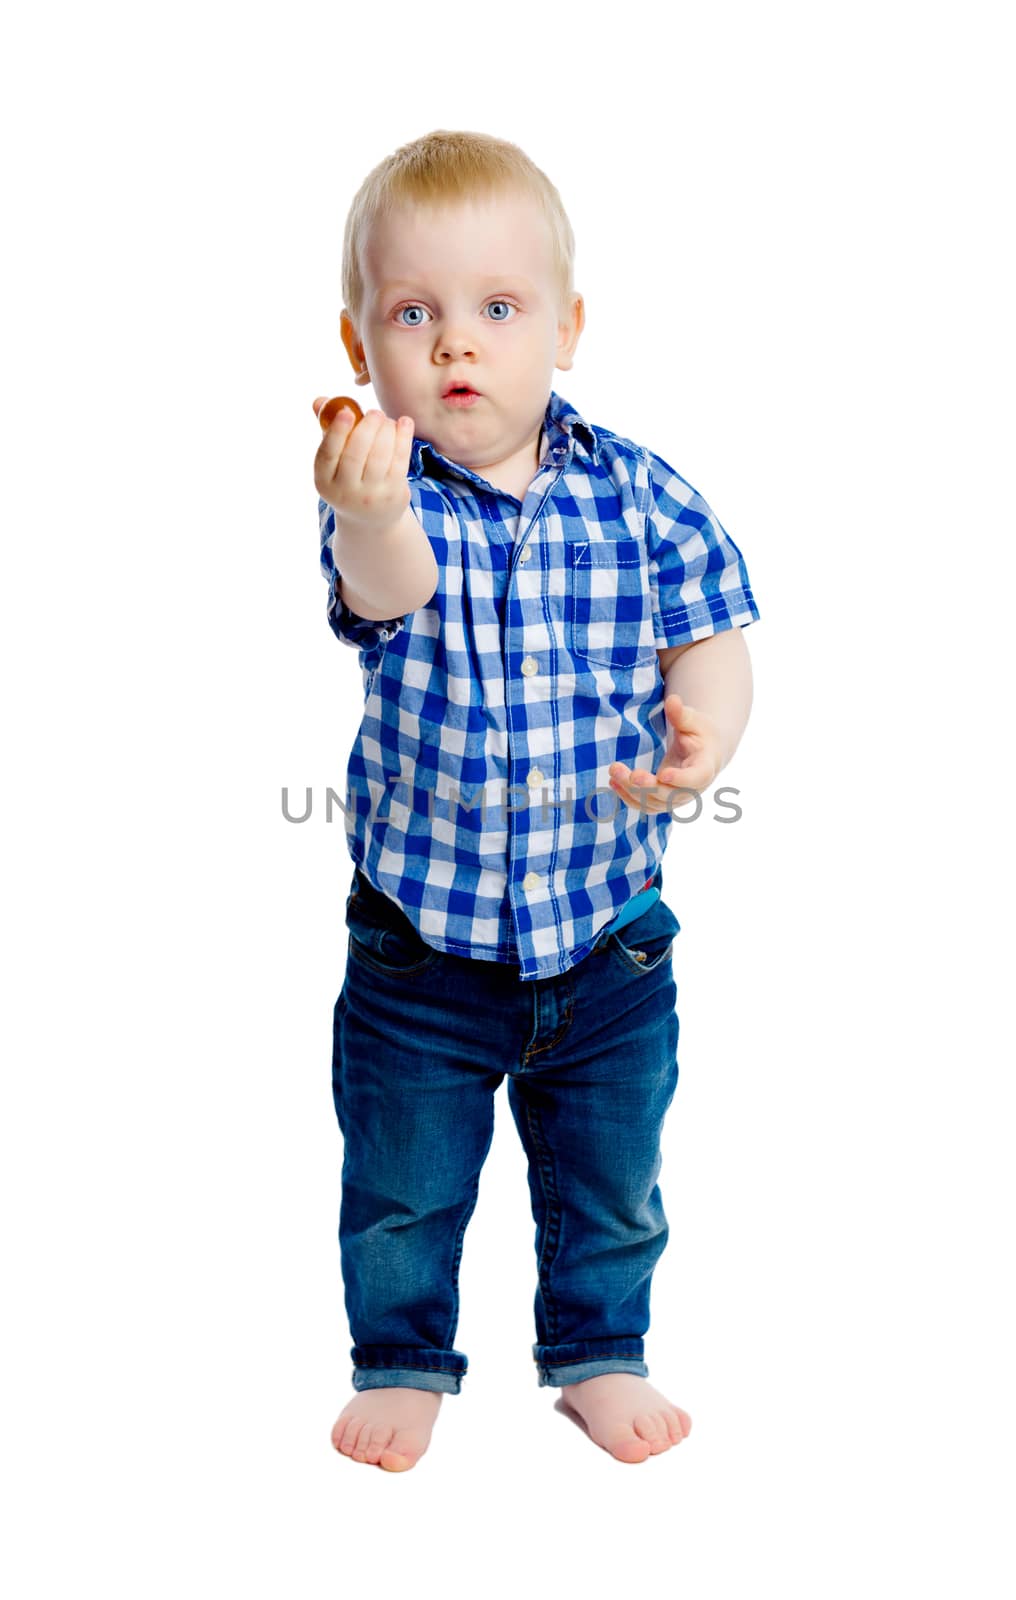 Little boy in a plaid shirt in full growth. White background. Studio